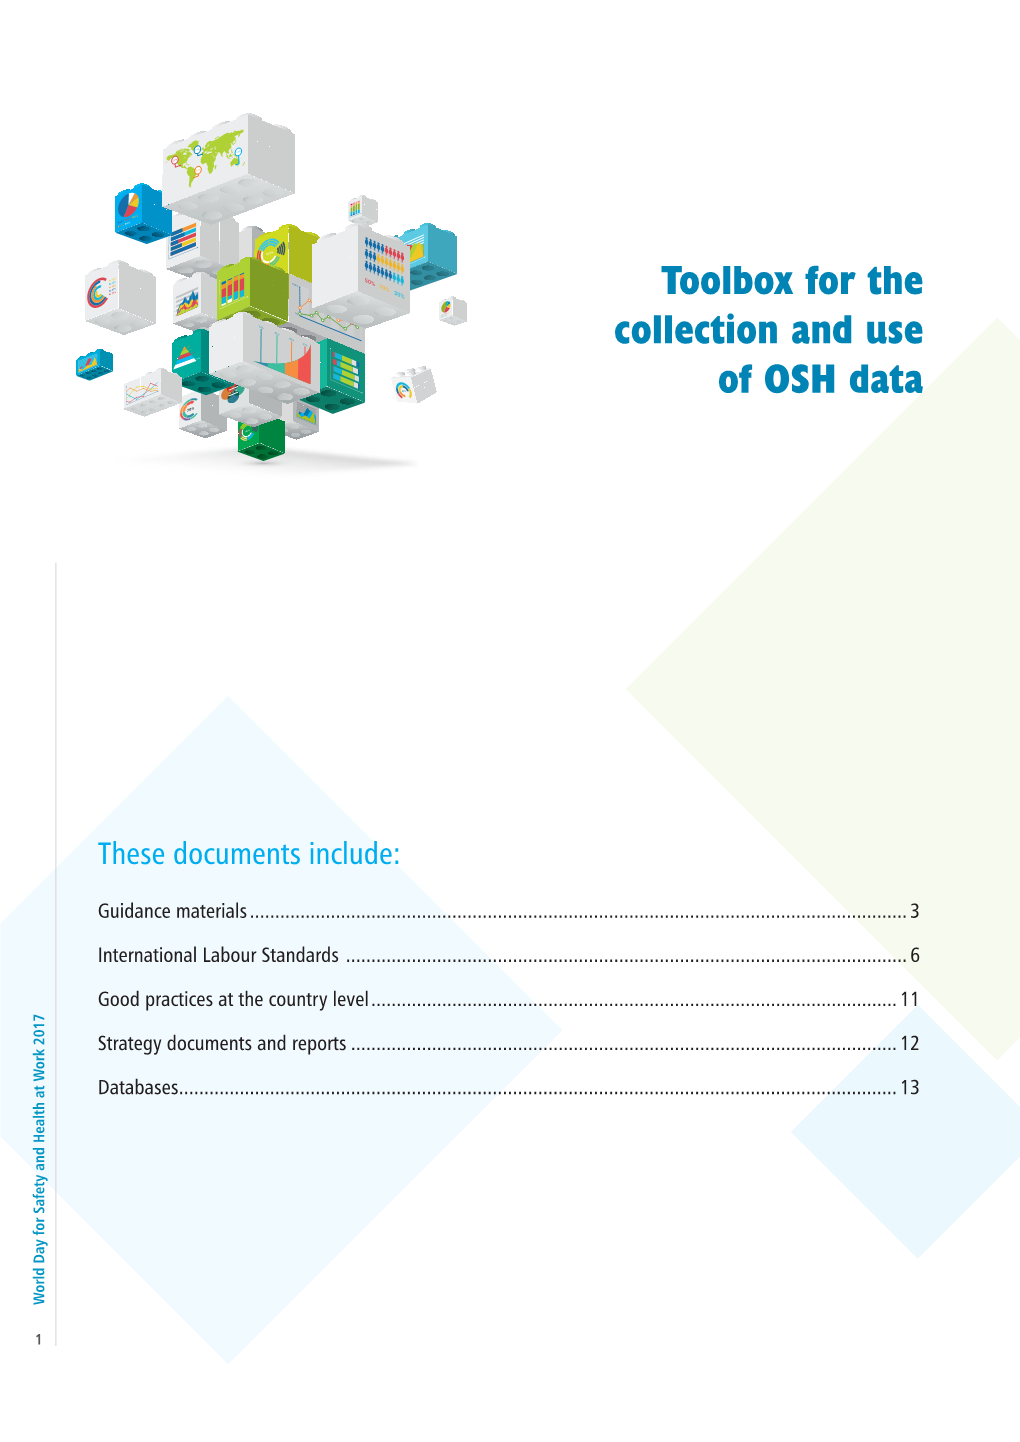 Toolbox for the Collection and Use of OSH Data